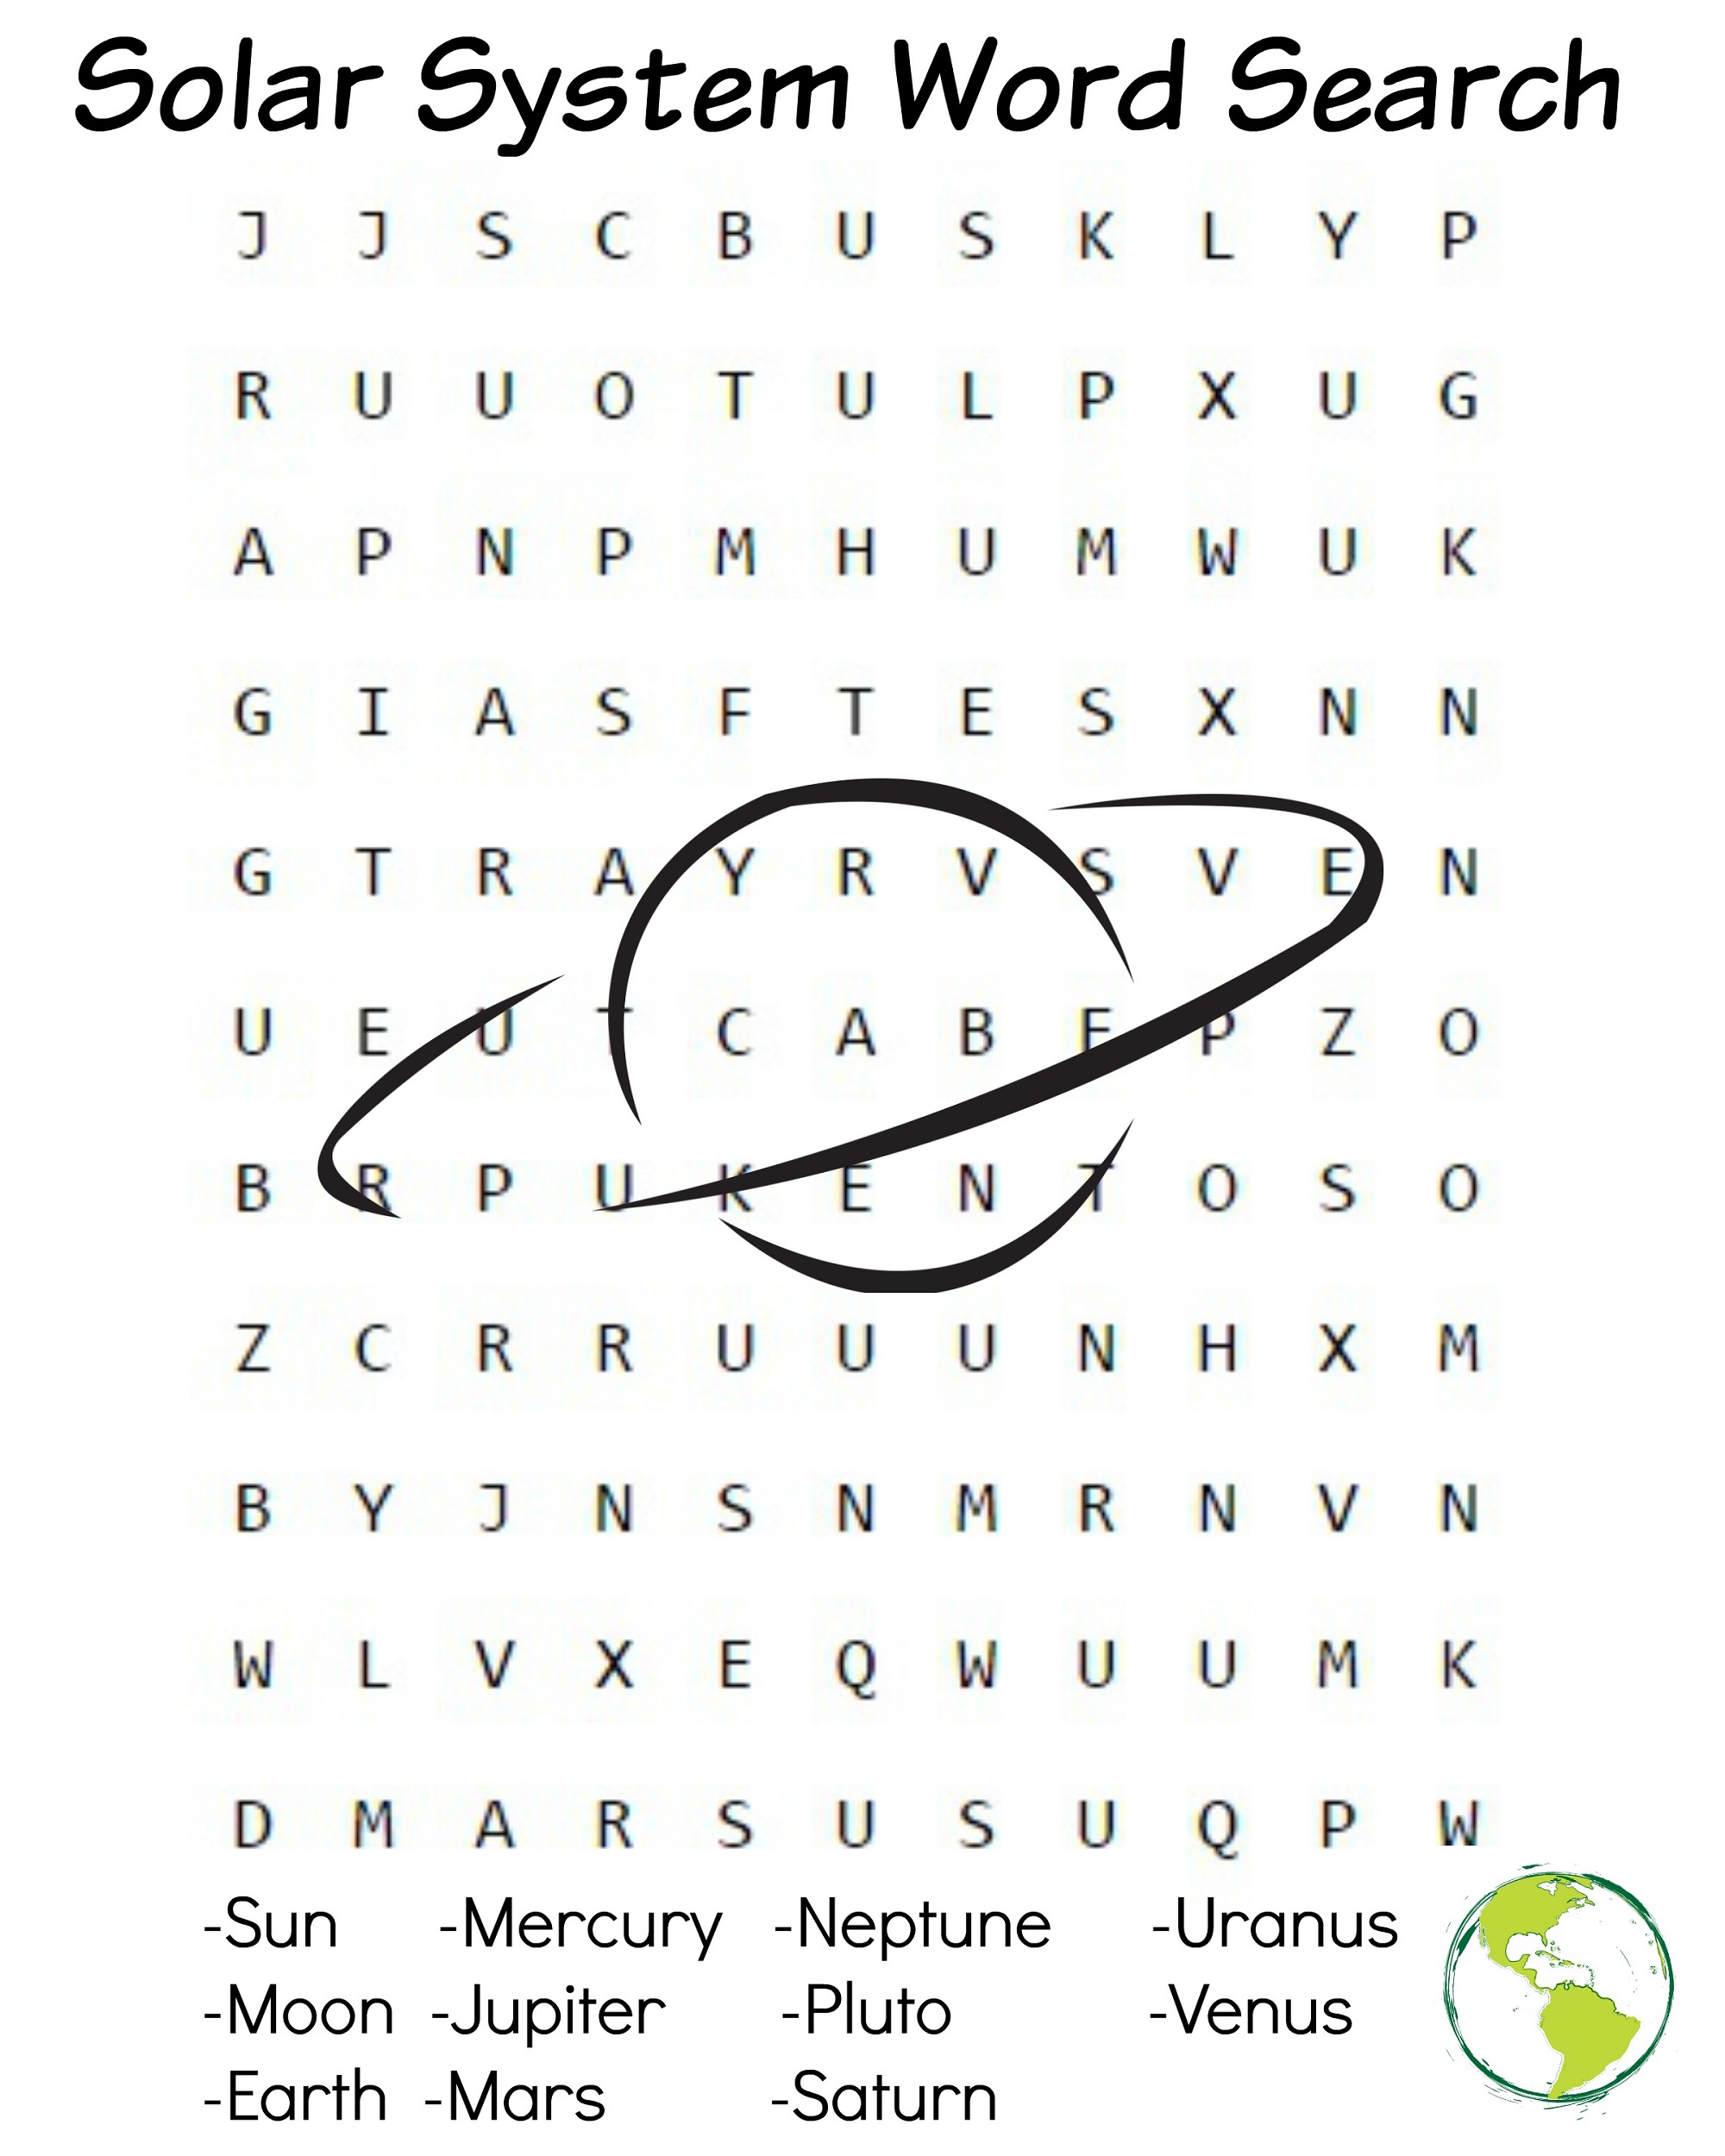 Solar System Word Search | Activity Shelter